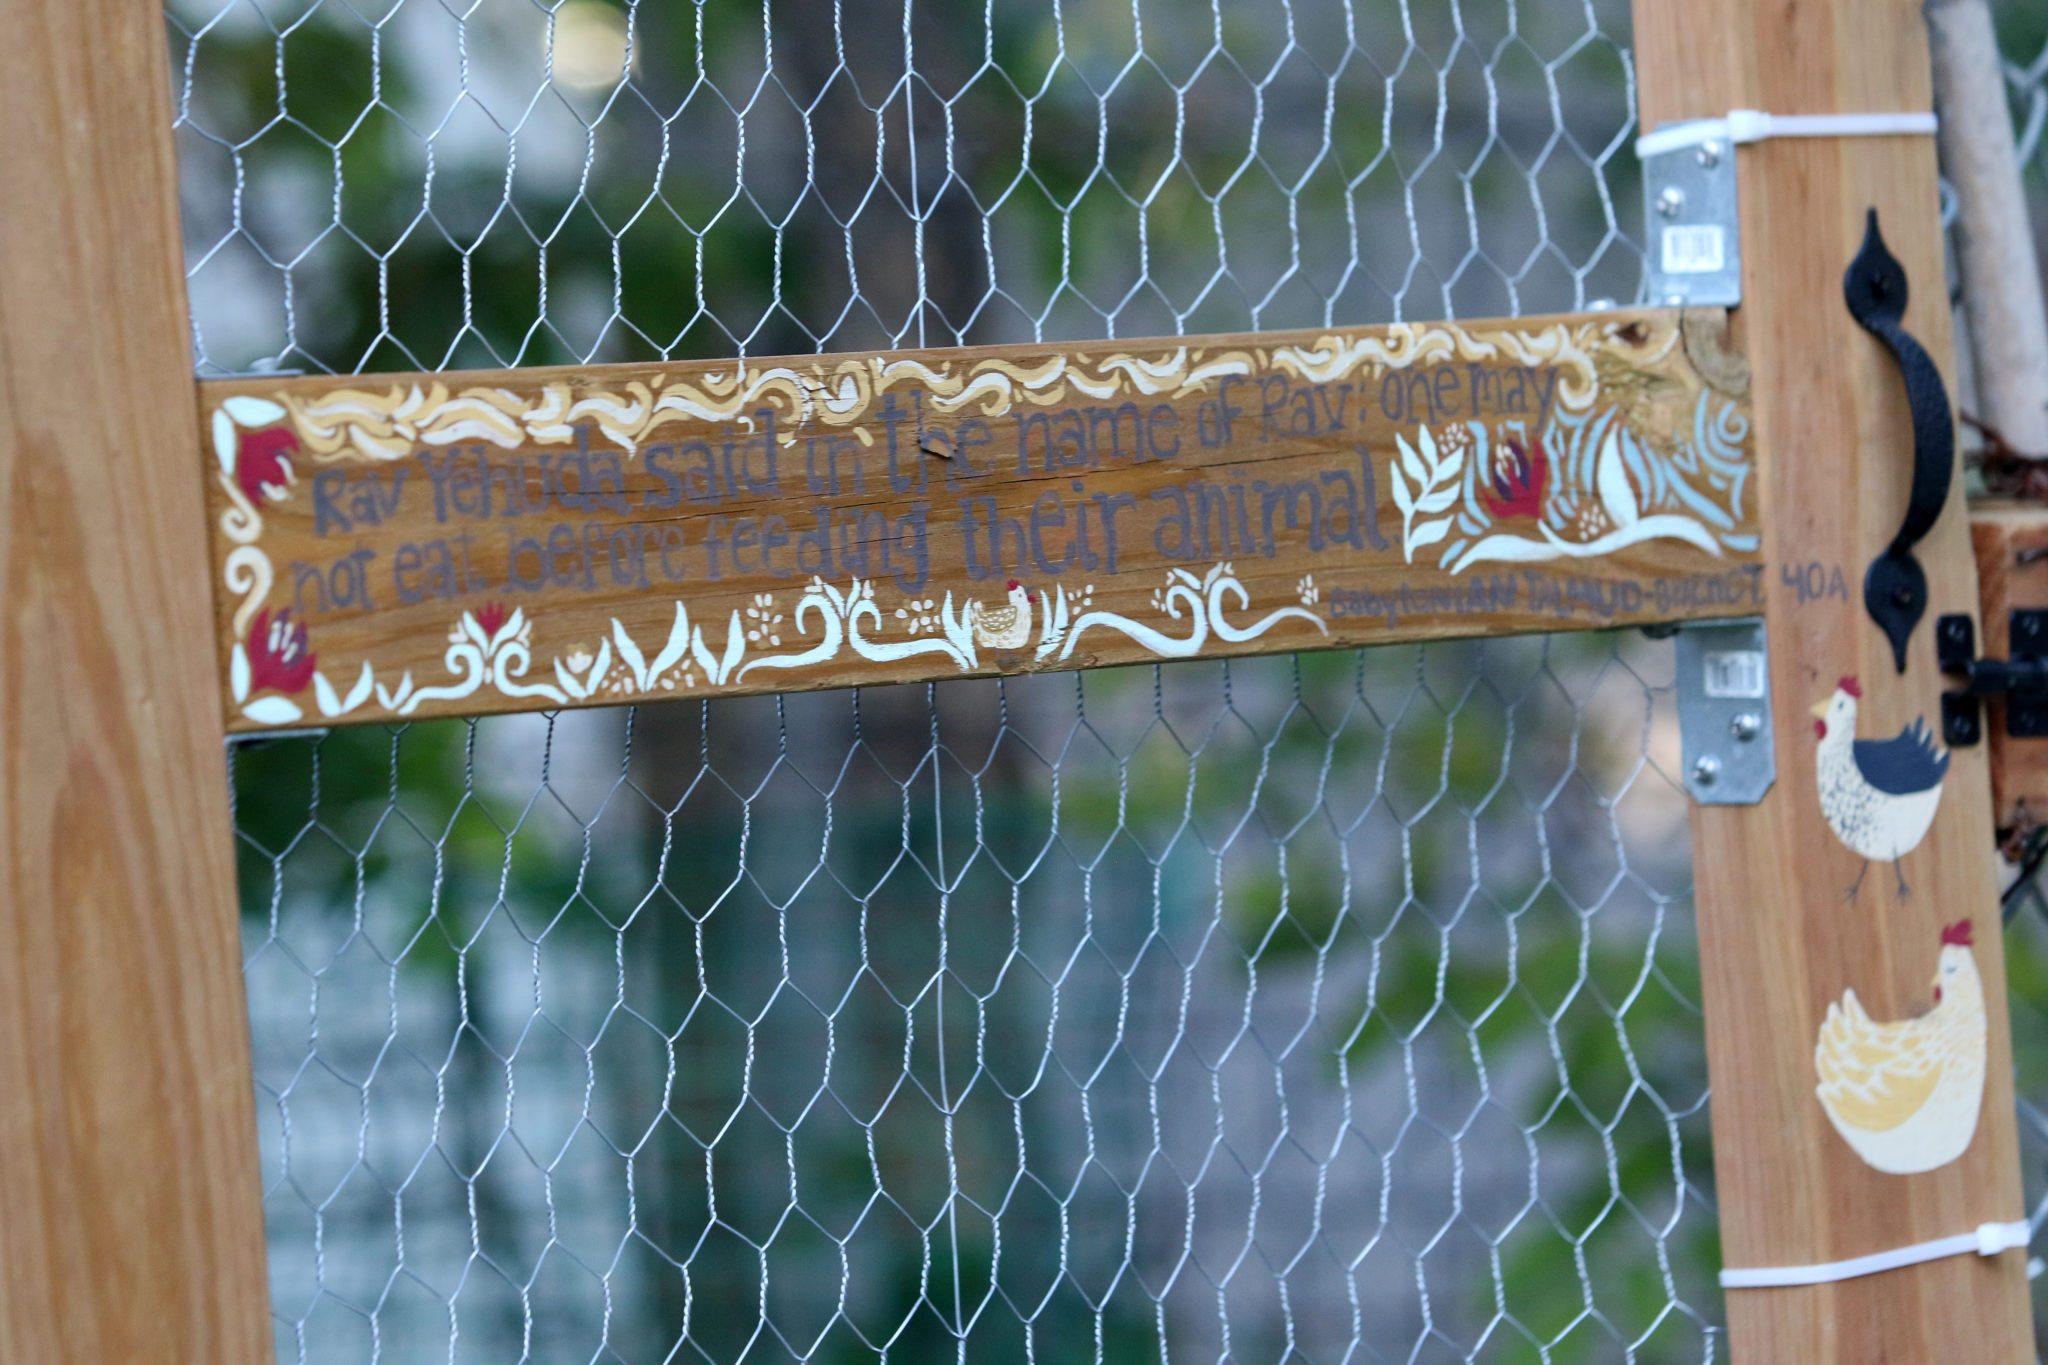 A wood and chain link fence with painted writing on the middle post. There are also paintings of chickens on the side of the fence.